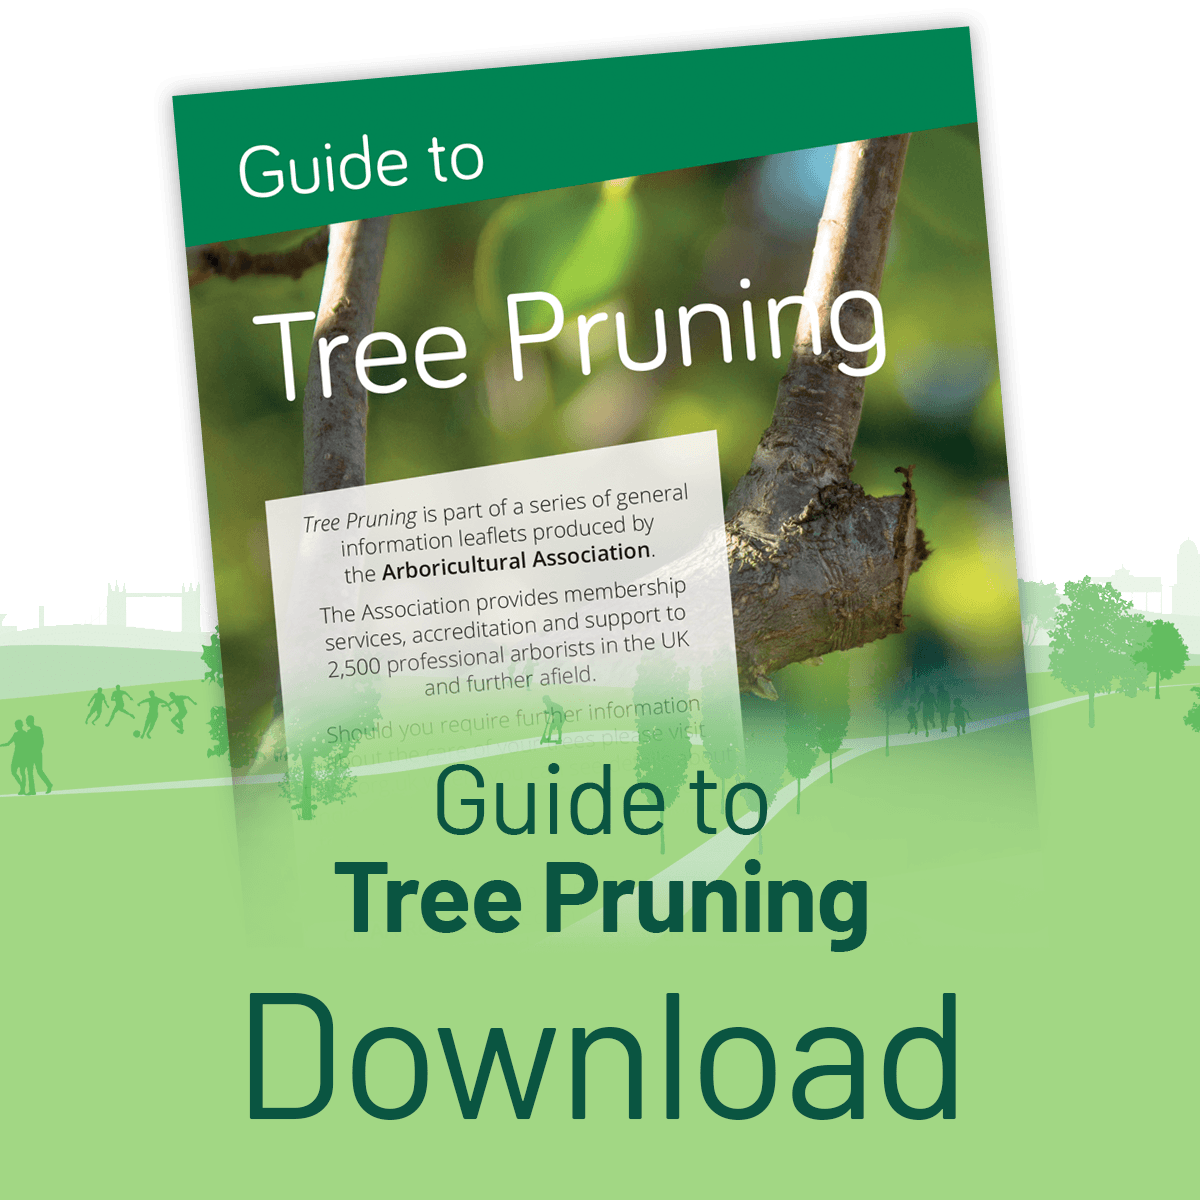 Download the Guide to Pruning